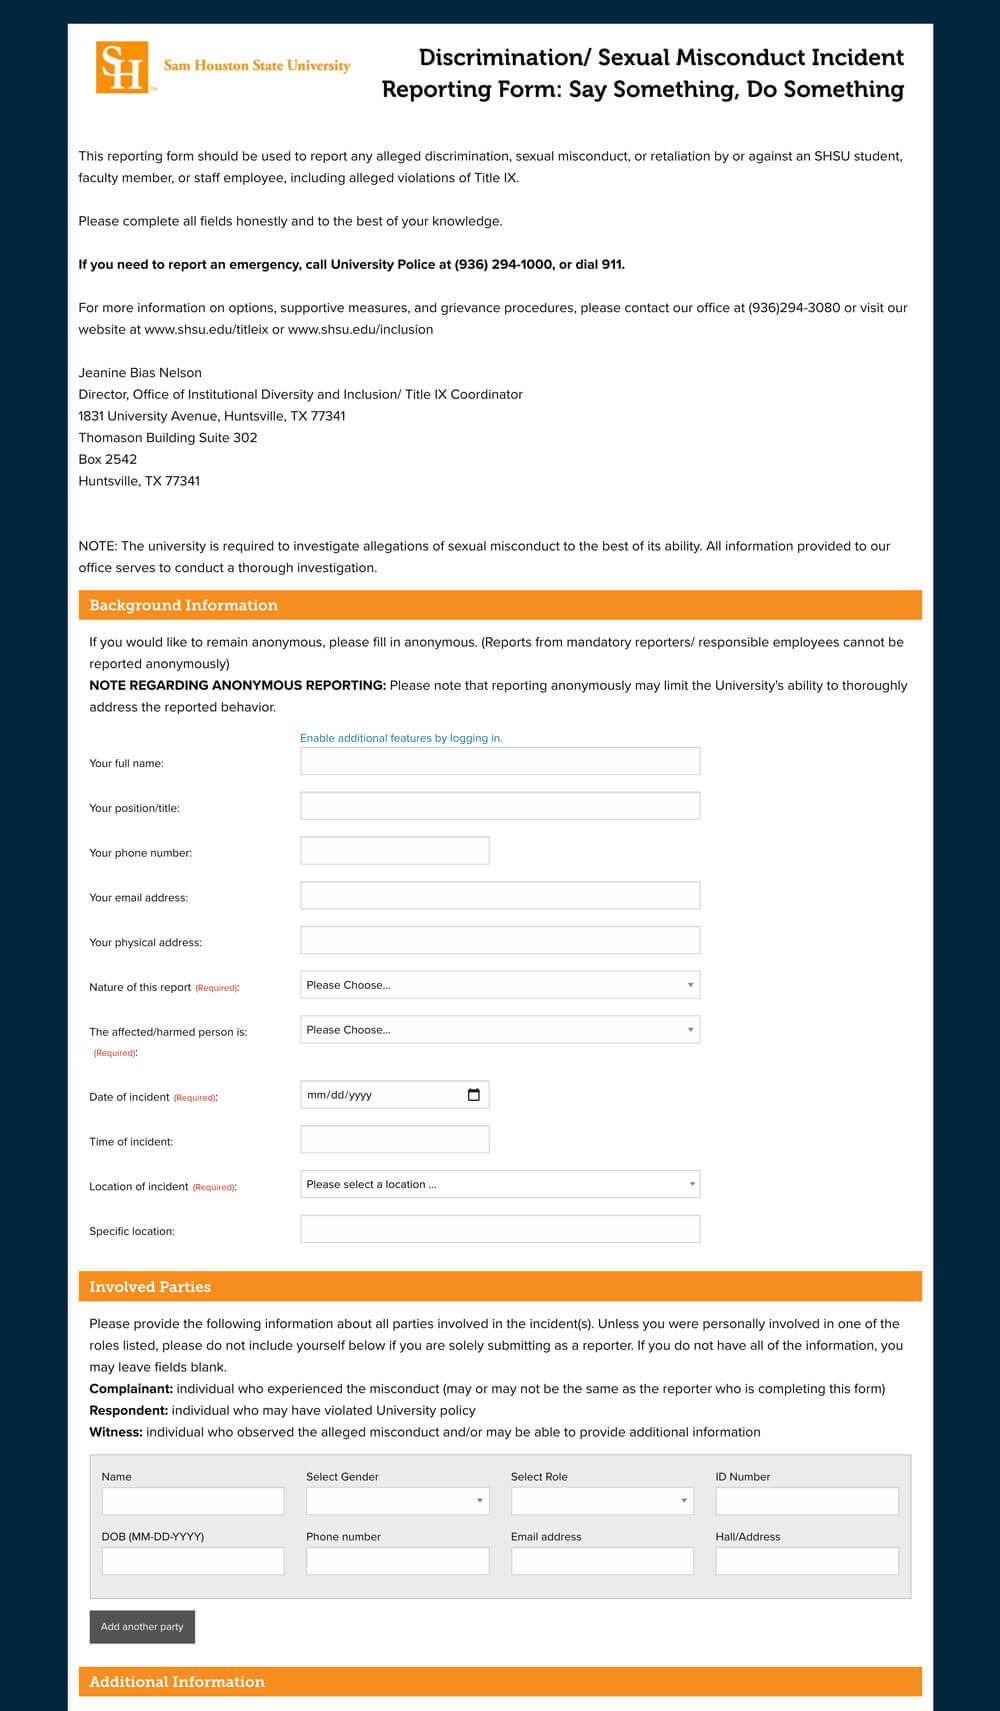 a clutter form with a dark blue background bright orange dividers with text and over 20 inputs